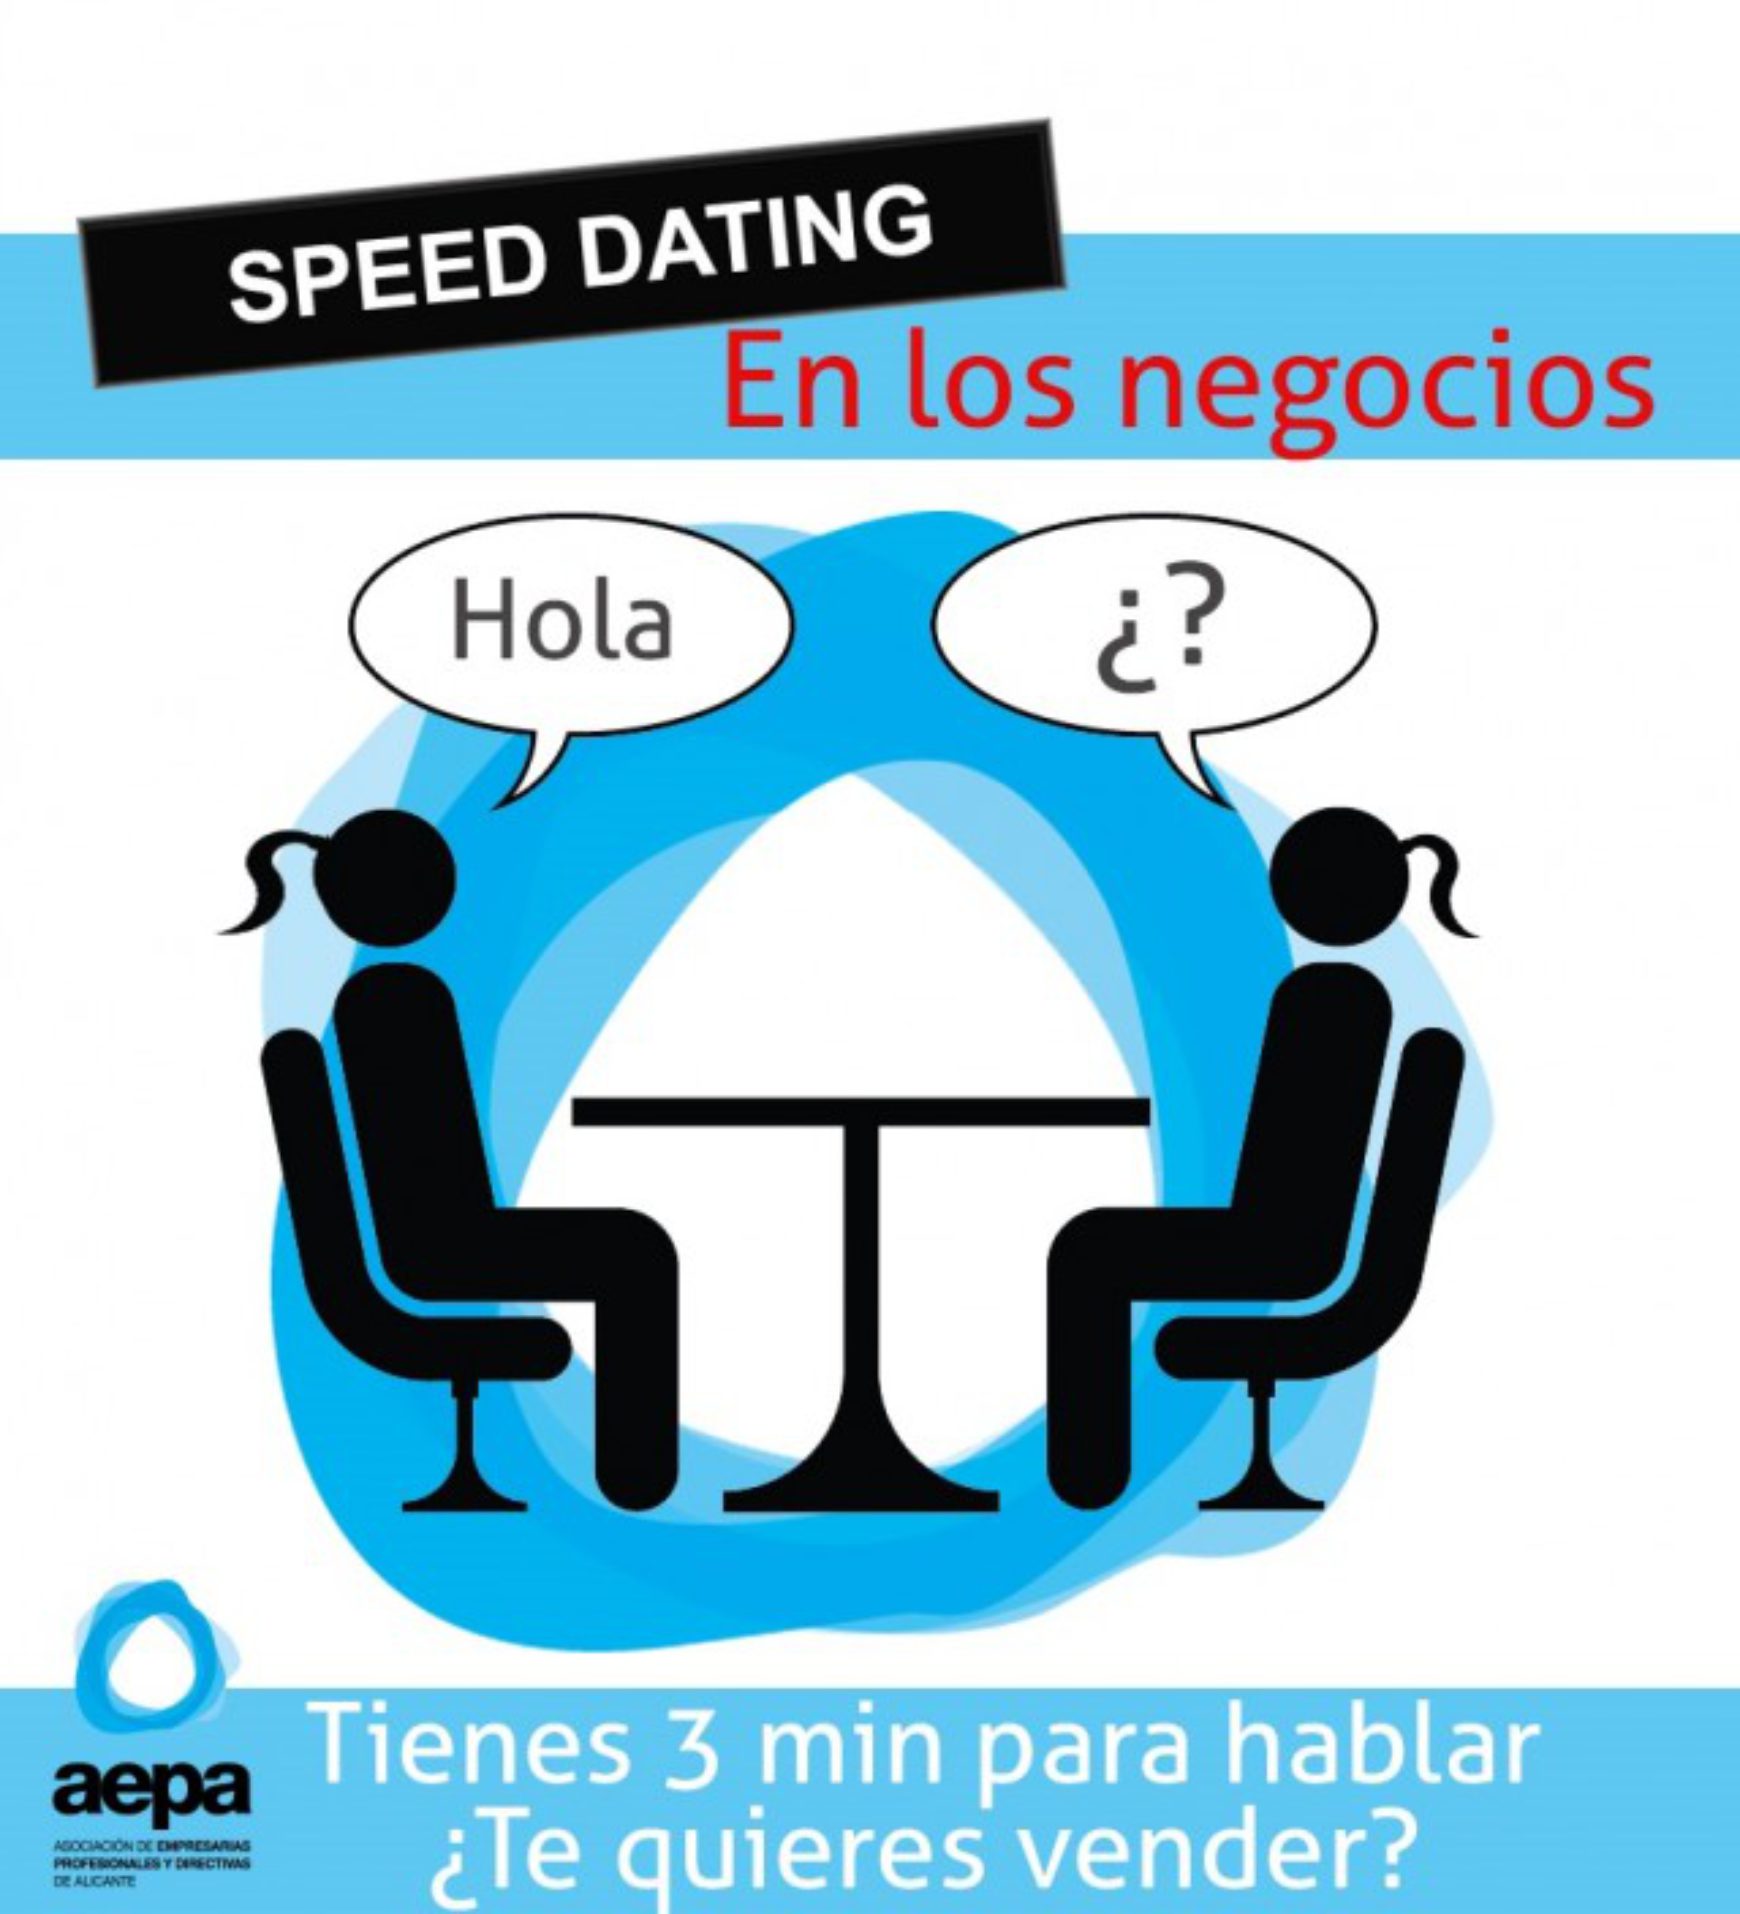 Speed dating: Networking + cerveza con AEPA